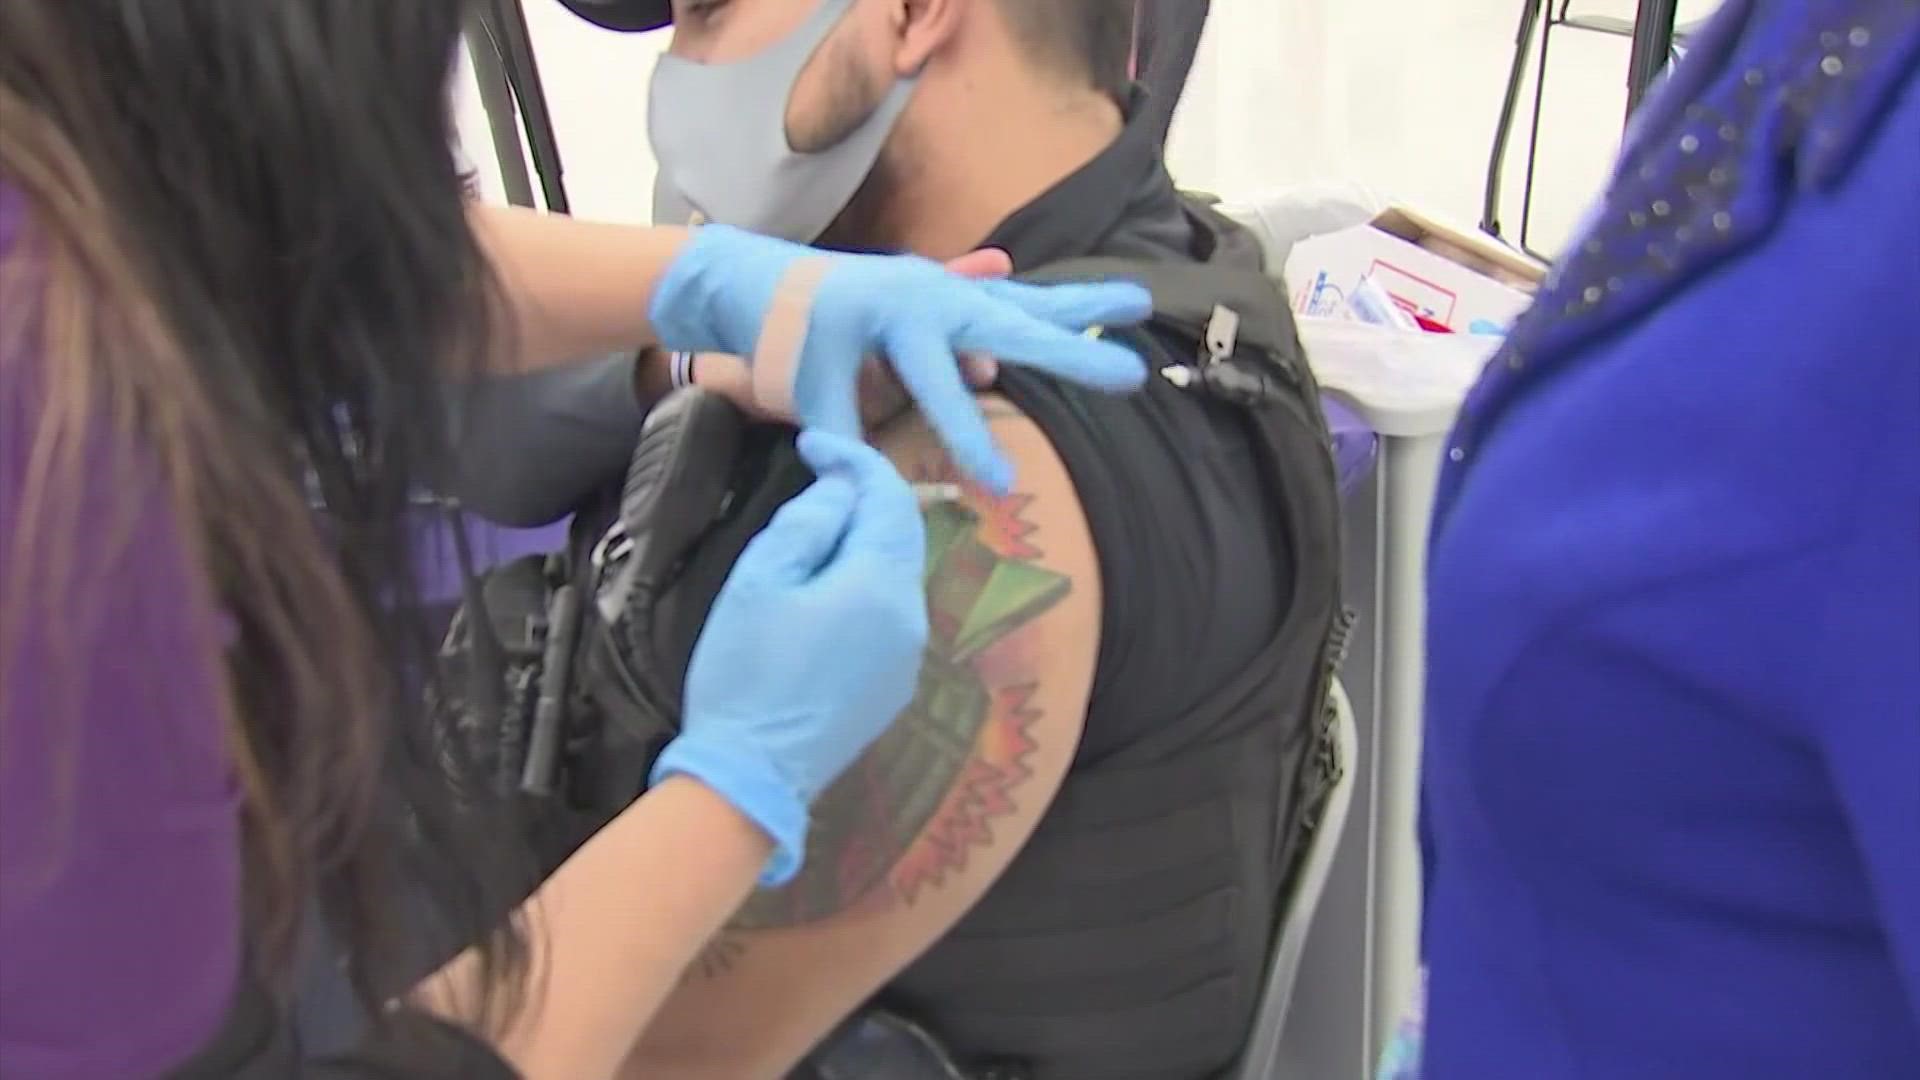 Members of the Houston Police Department got vaccinated during the neighborhood outreach event, which also focused on children and seniors.